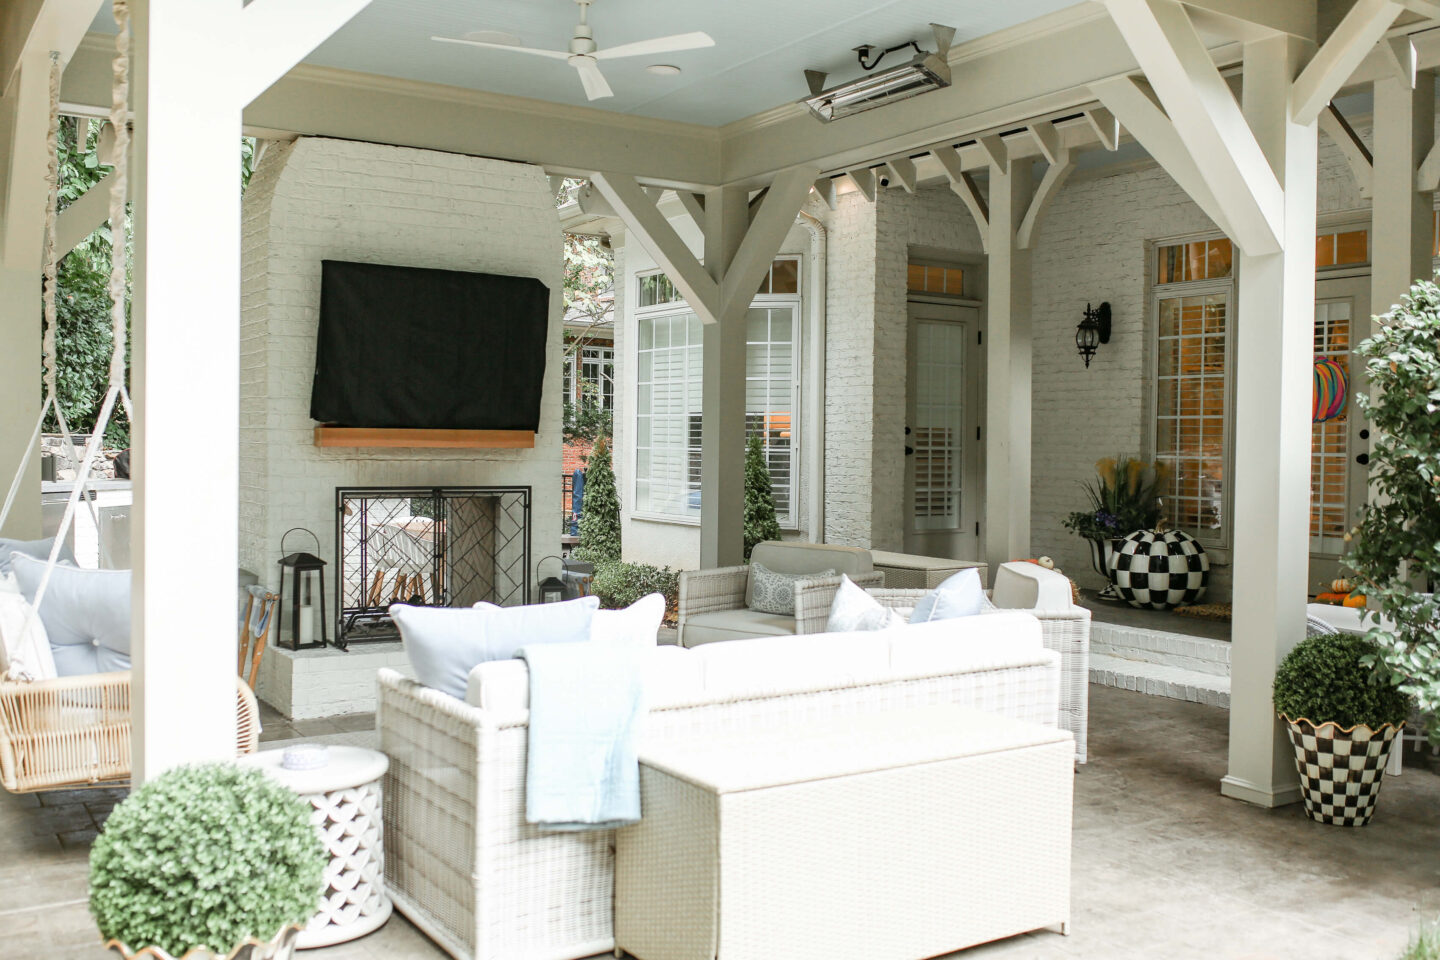 TV on back patio with couch